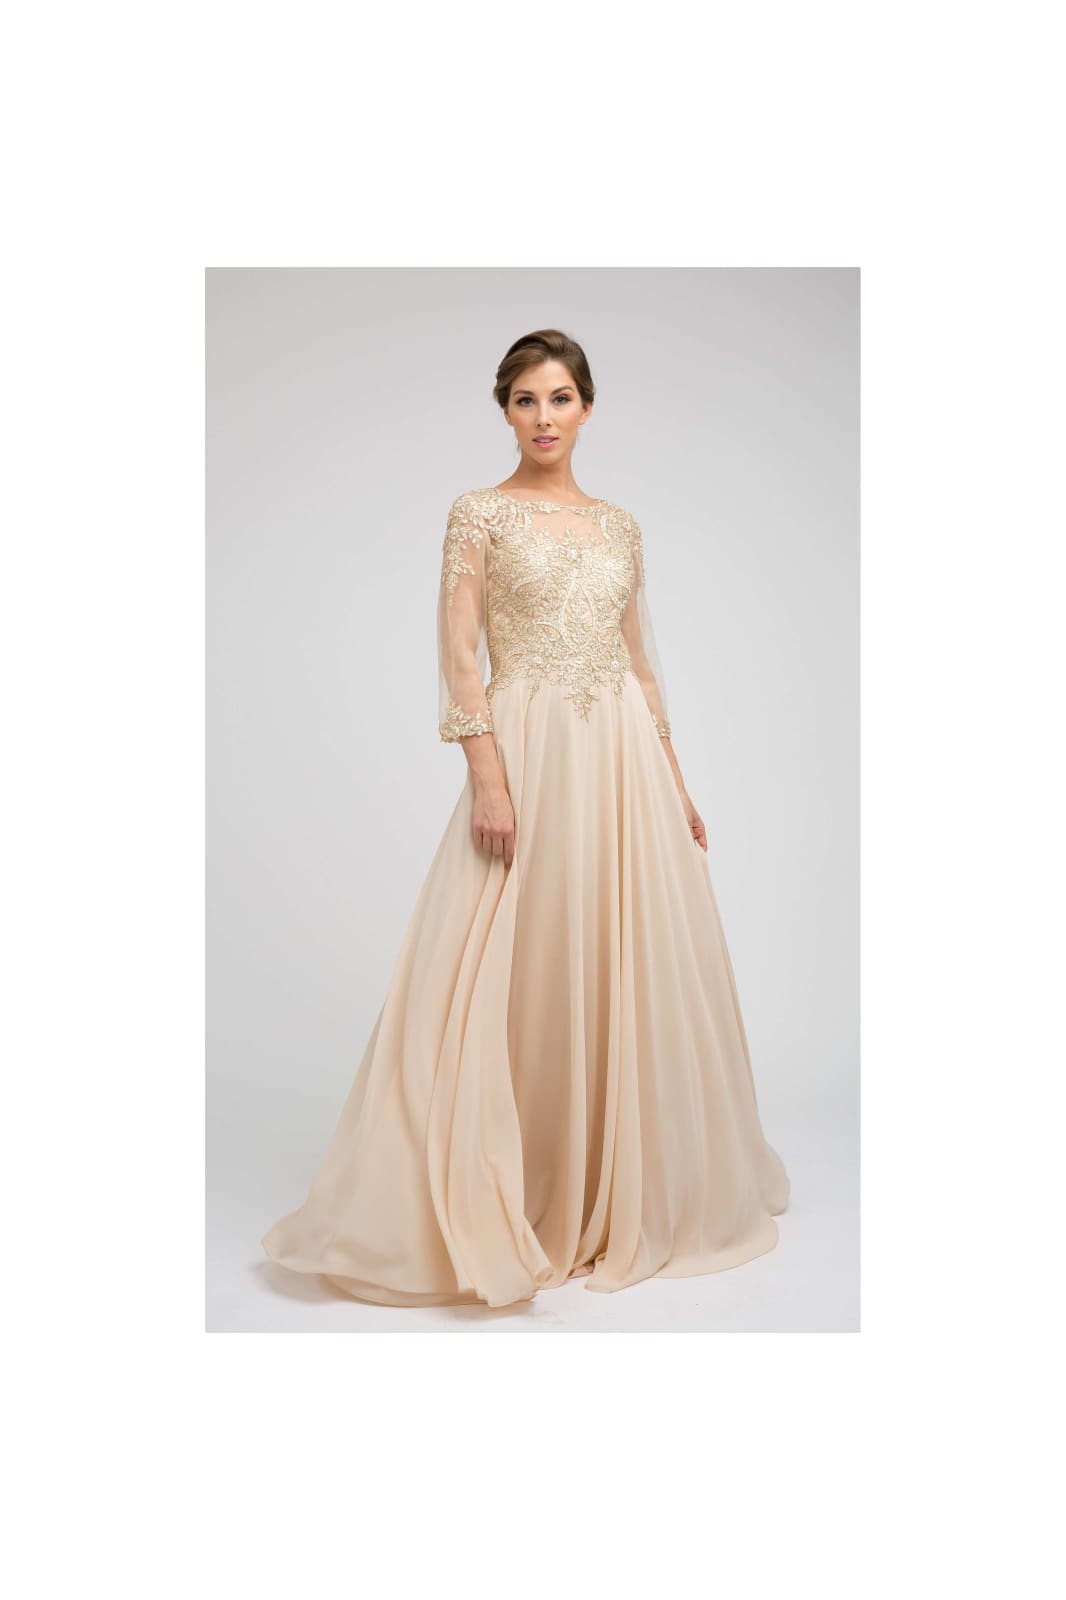 Beautiful 3/4 Sleeve Mother of the Bride Gown - LATM12 - CHAMPAGNE - LA Merchandise